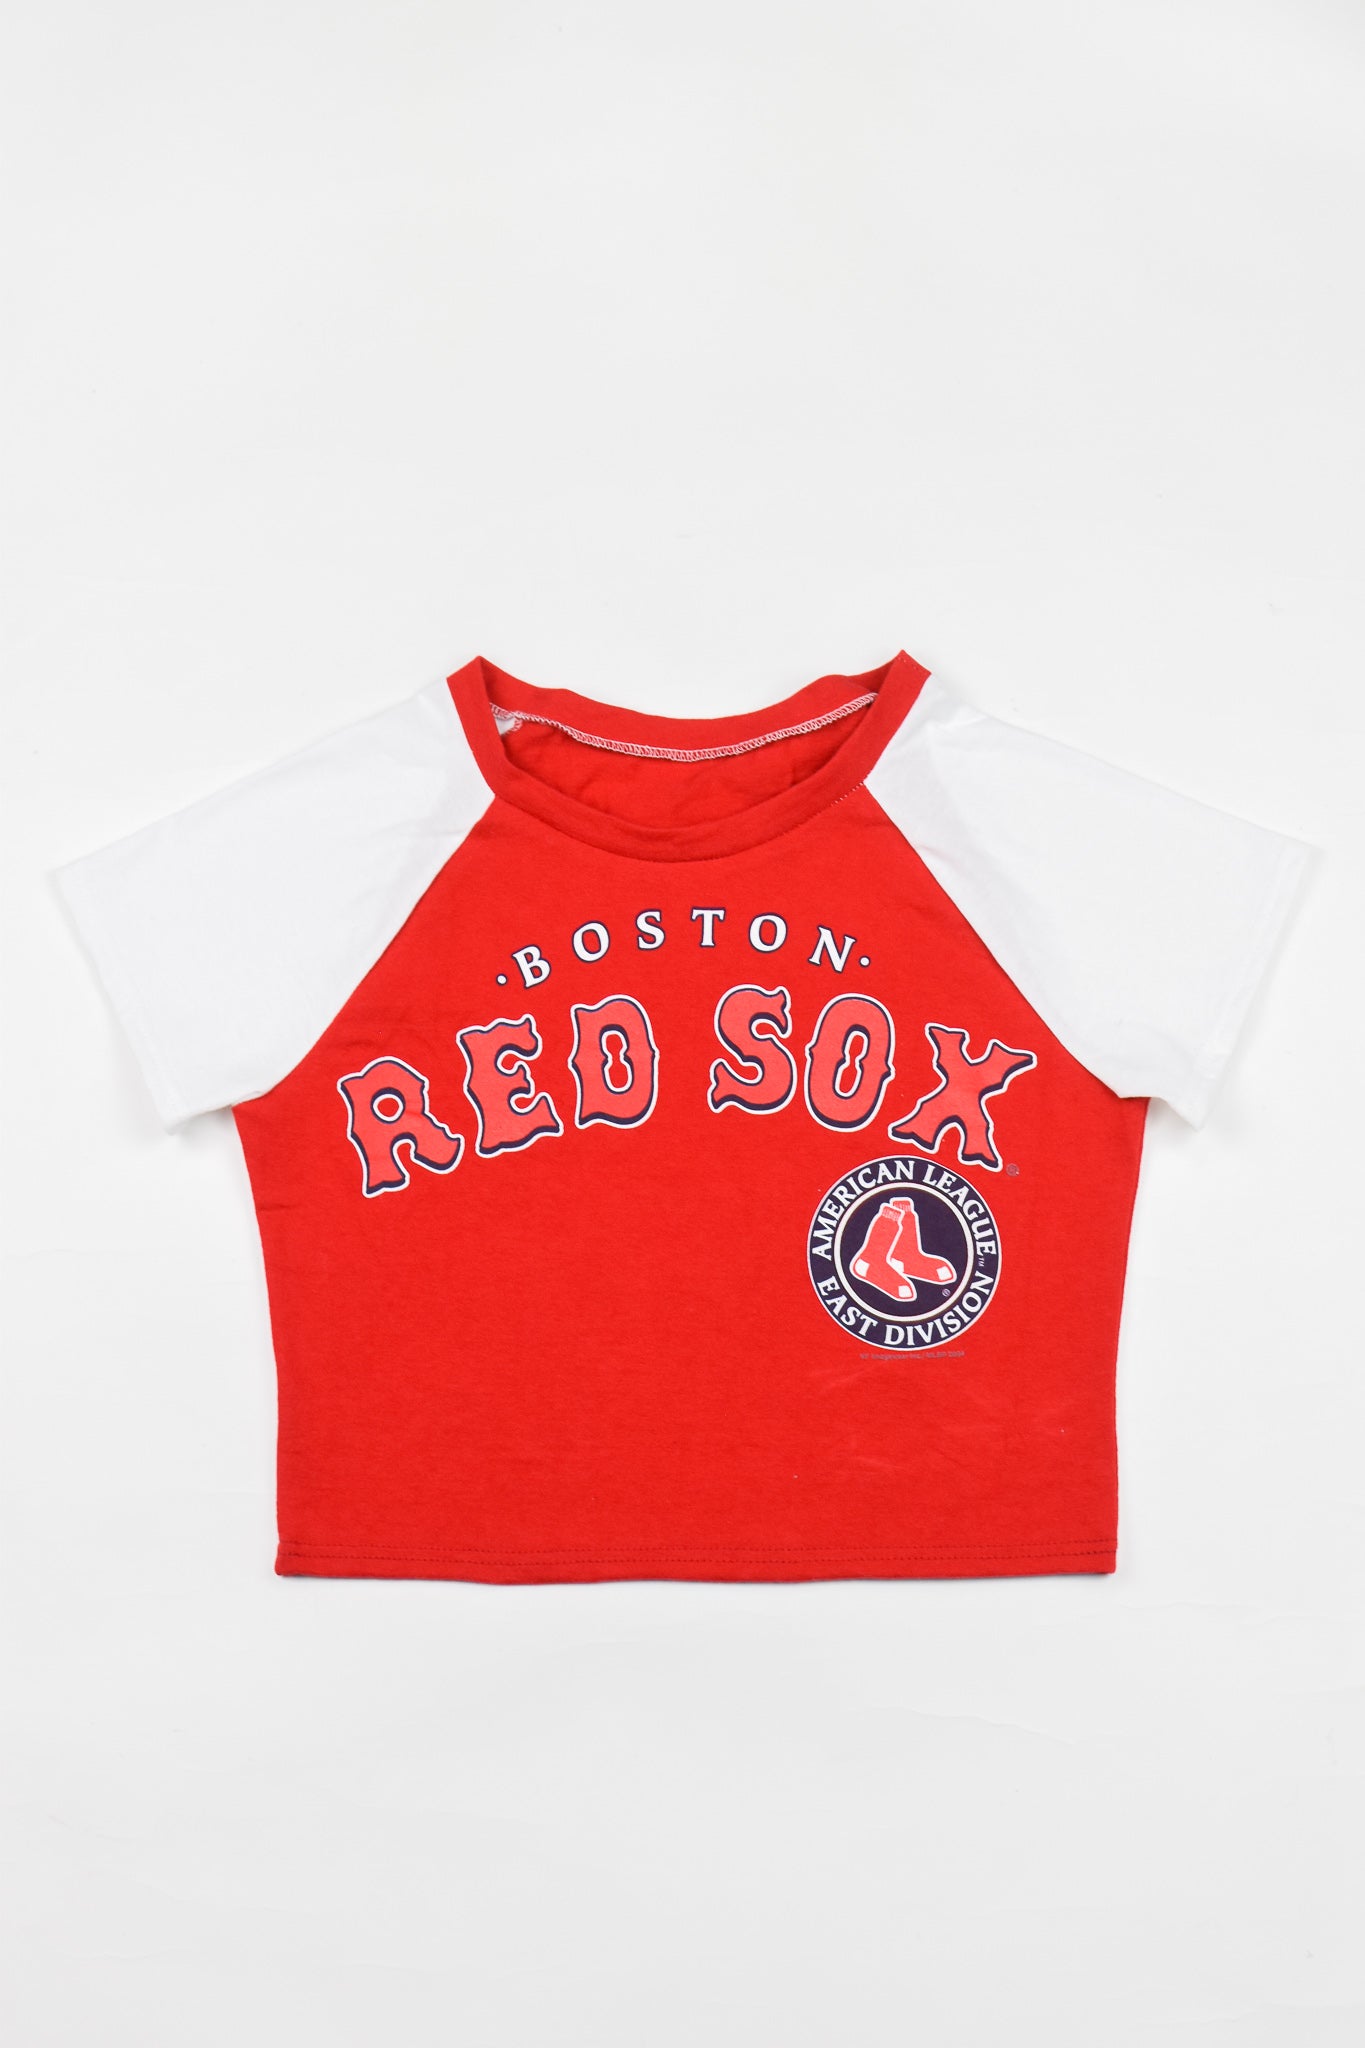 Upcycled Red Sox Baby Tee - Tonguetied Apparel